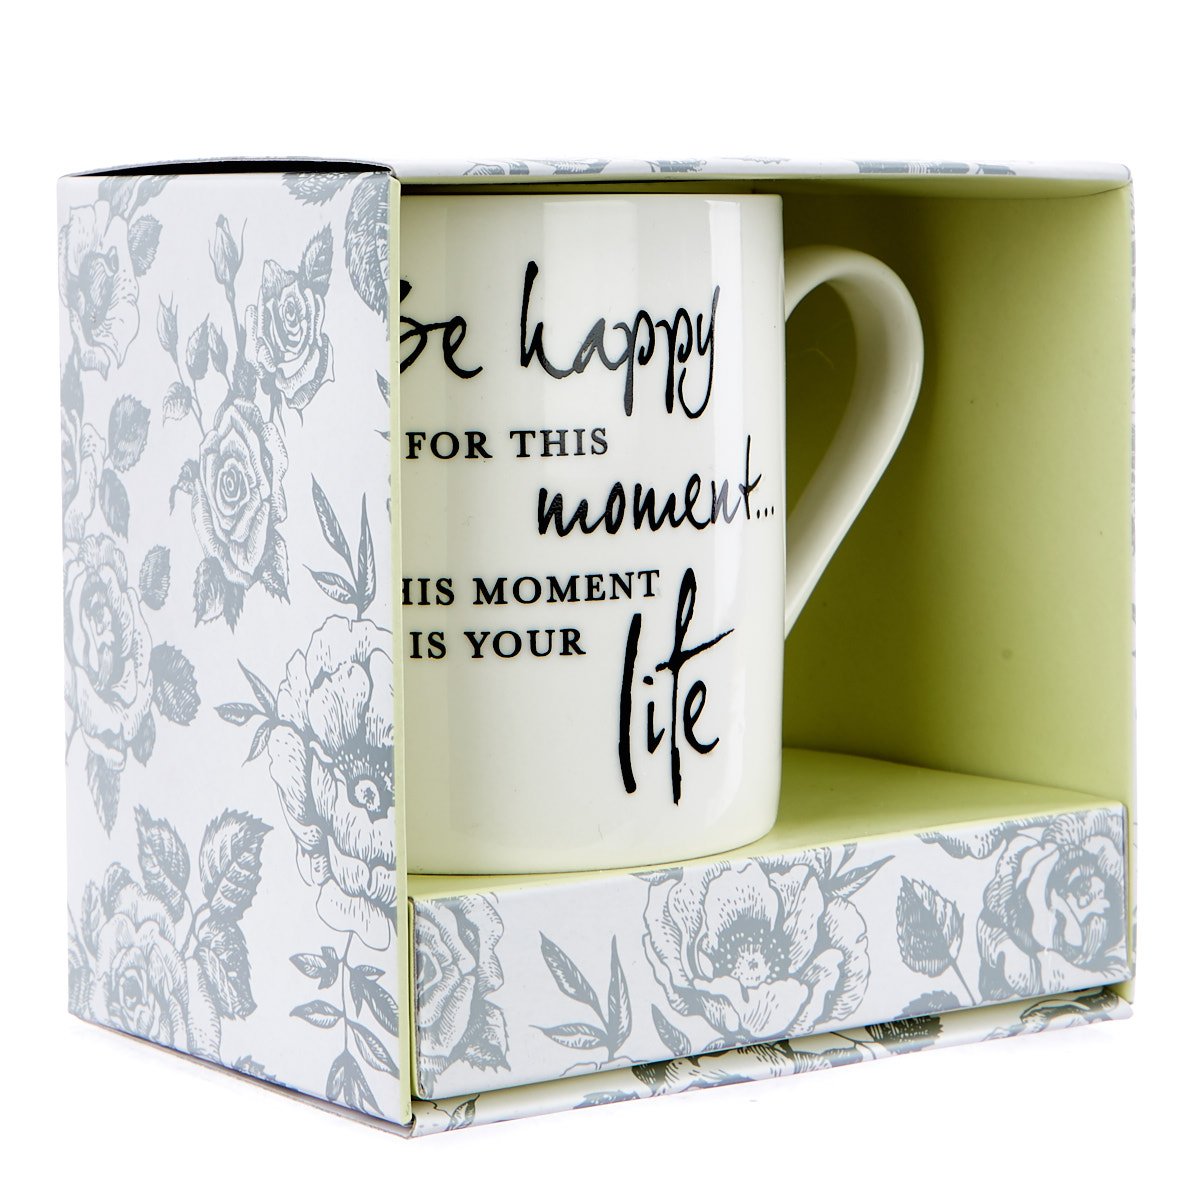 Victoria Meredith Thoughts For Life Mug - Be Happy 